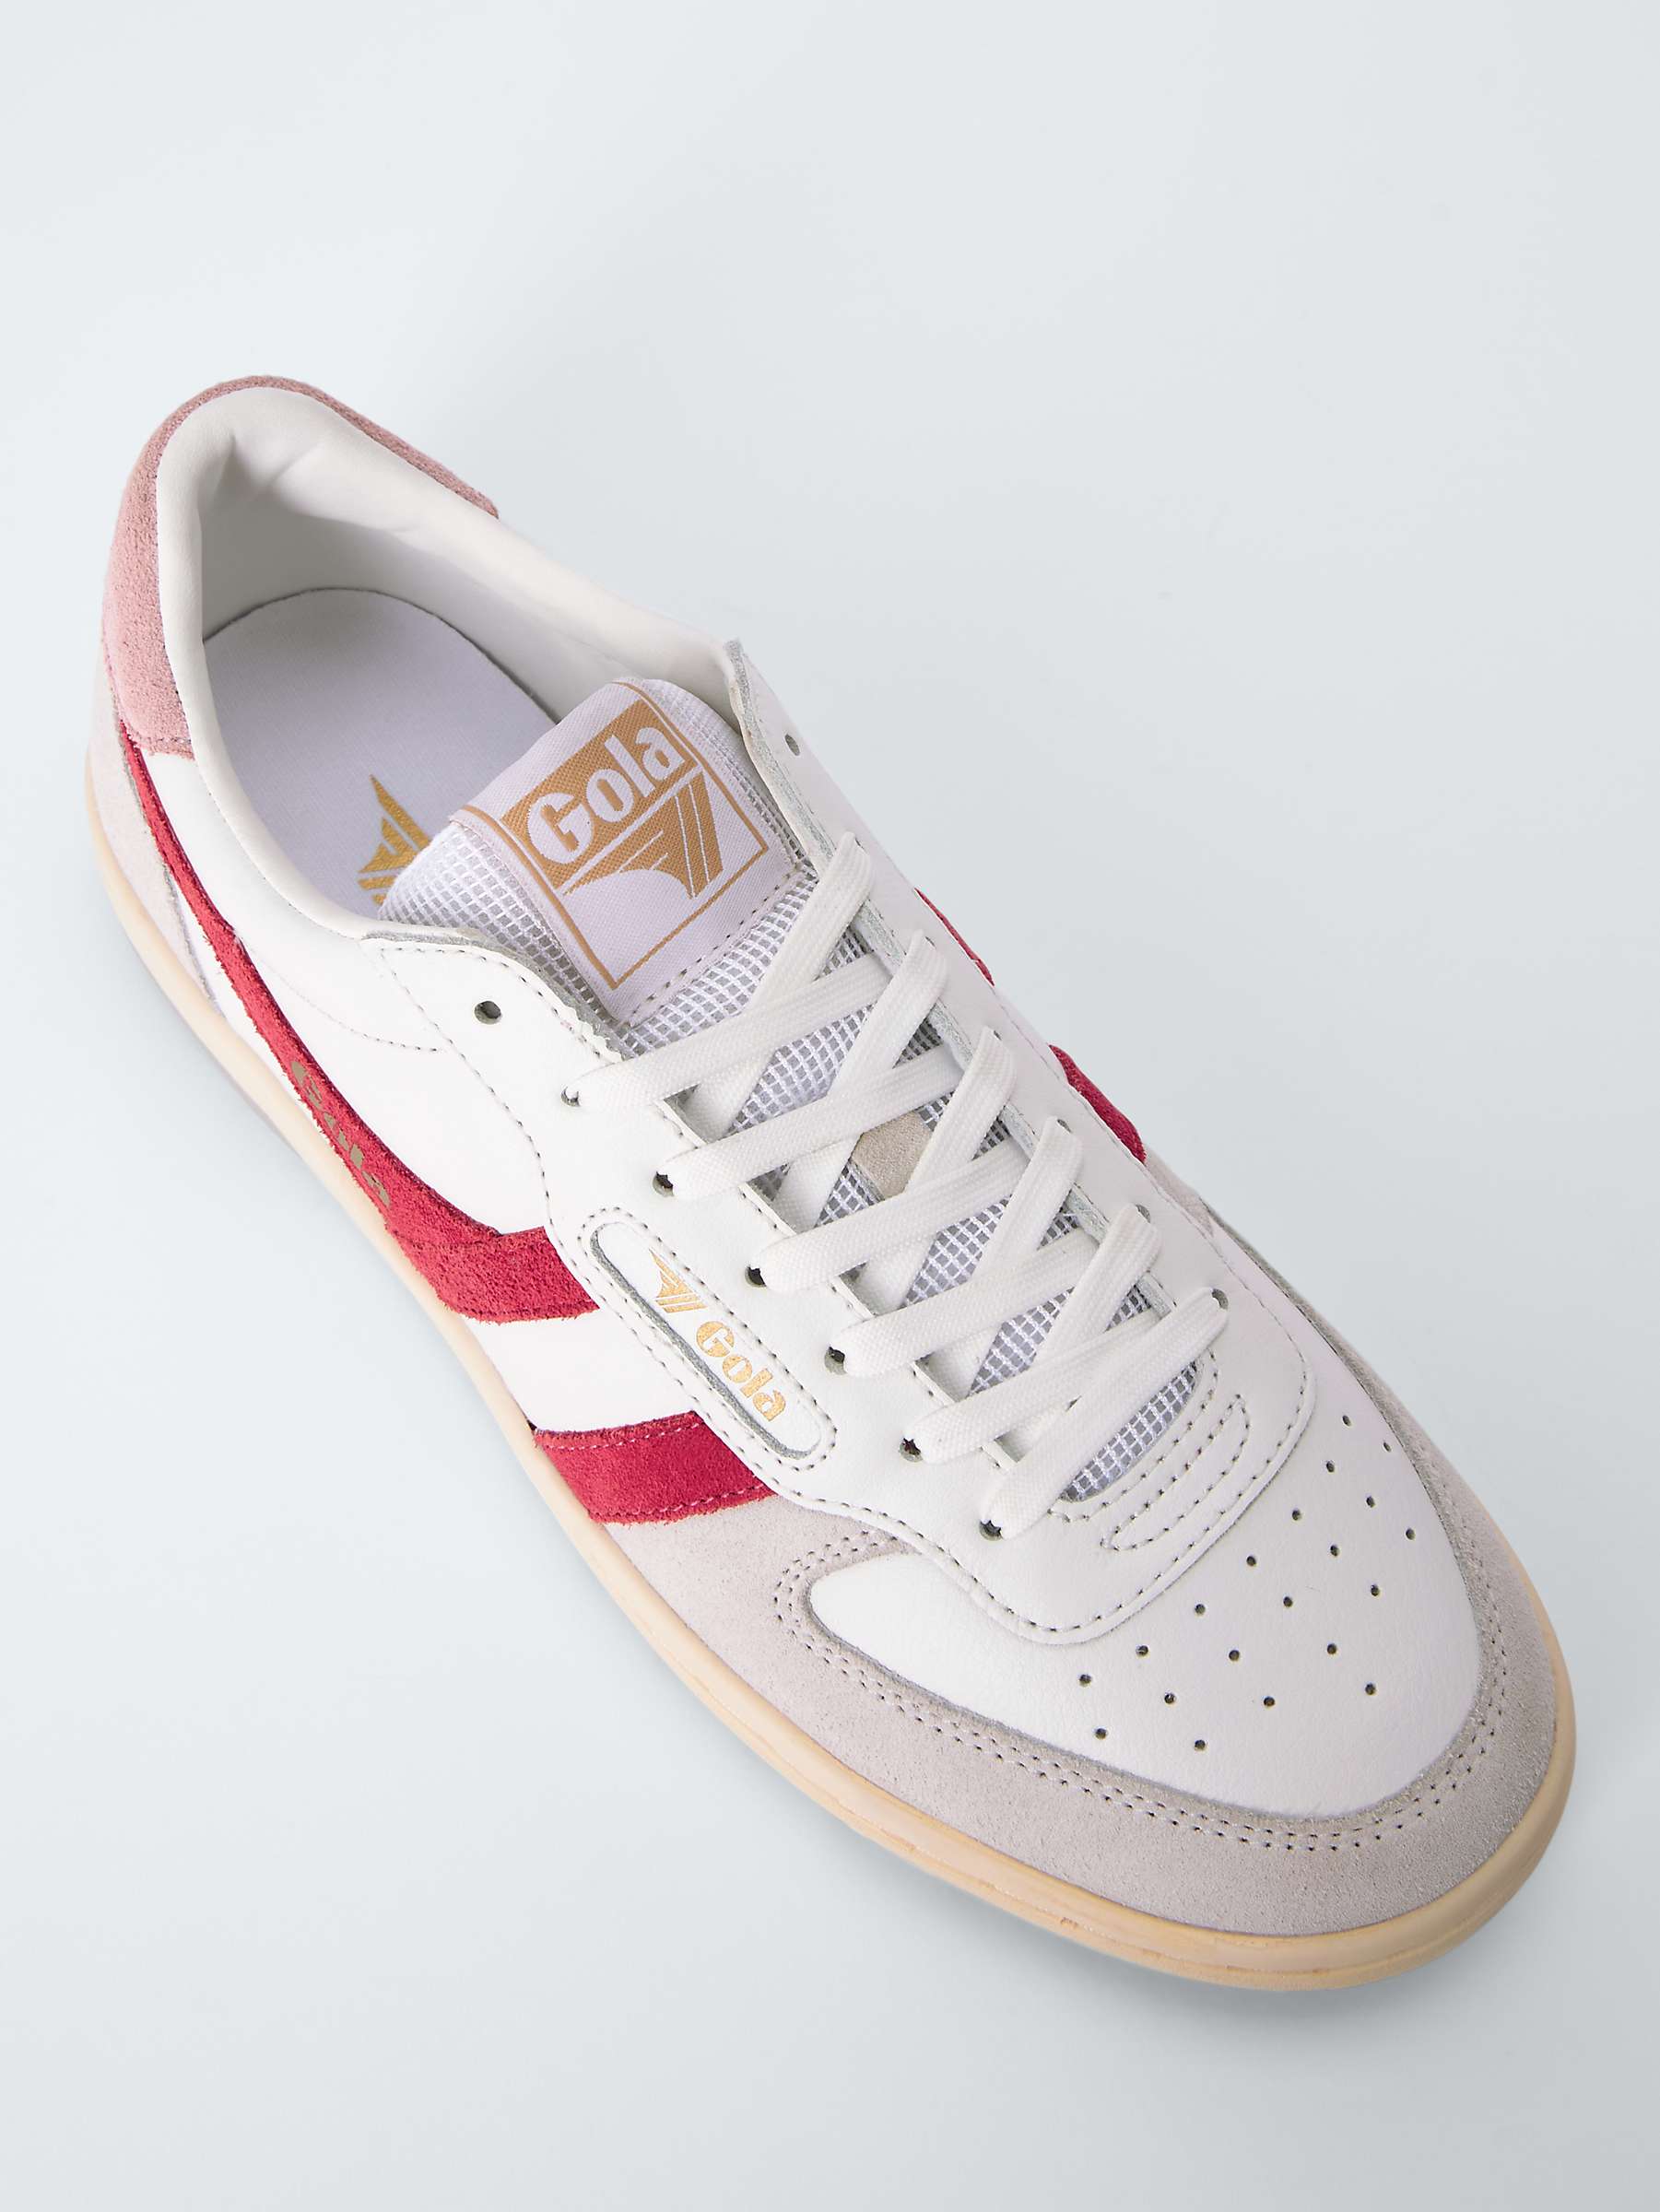 Buy Gola Hawk Leather Low Top Trainers Online at johnlewis.com